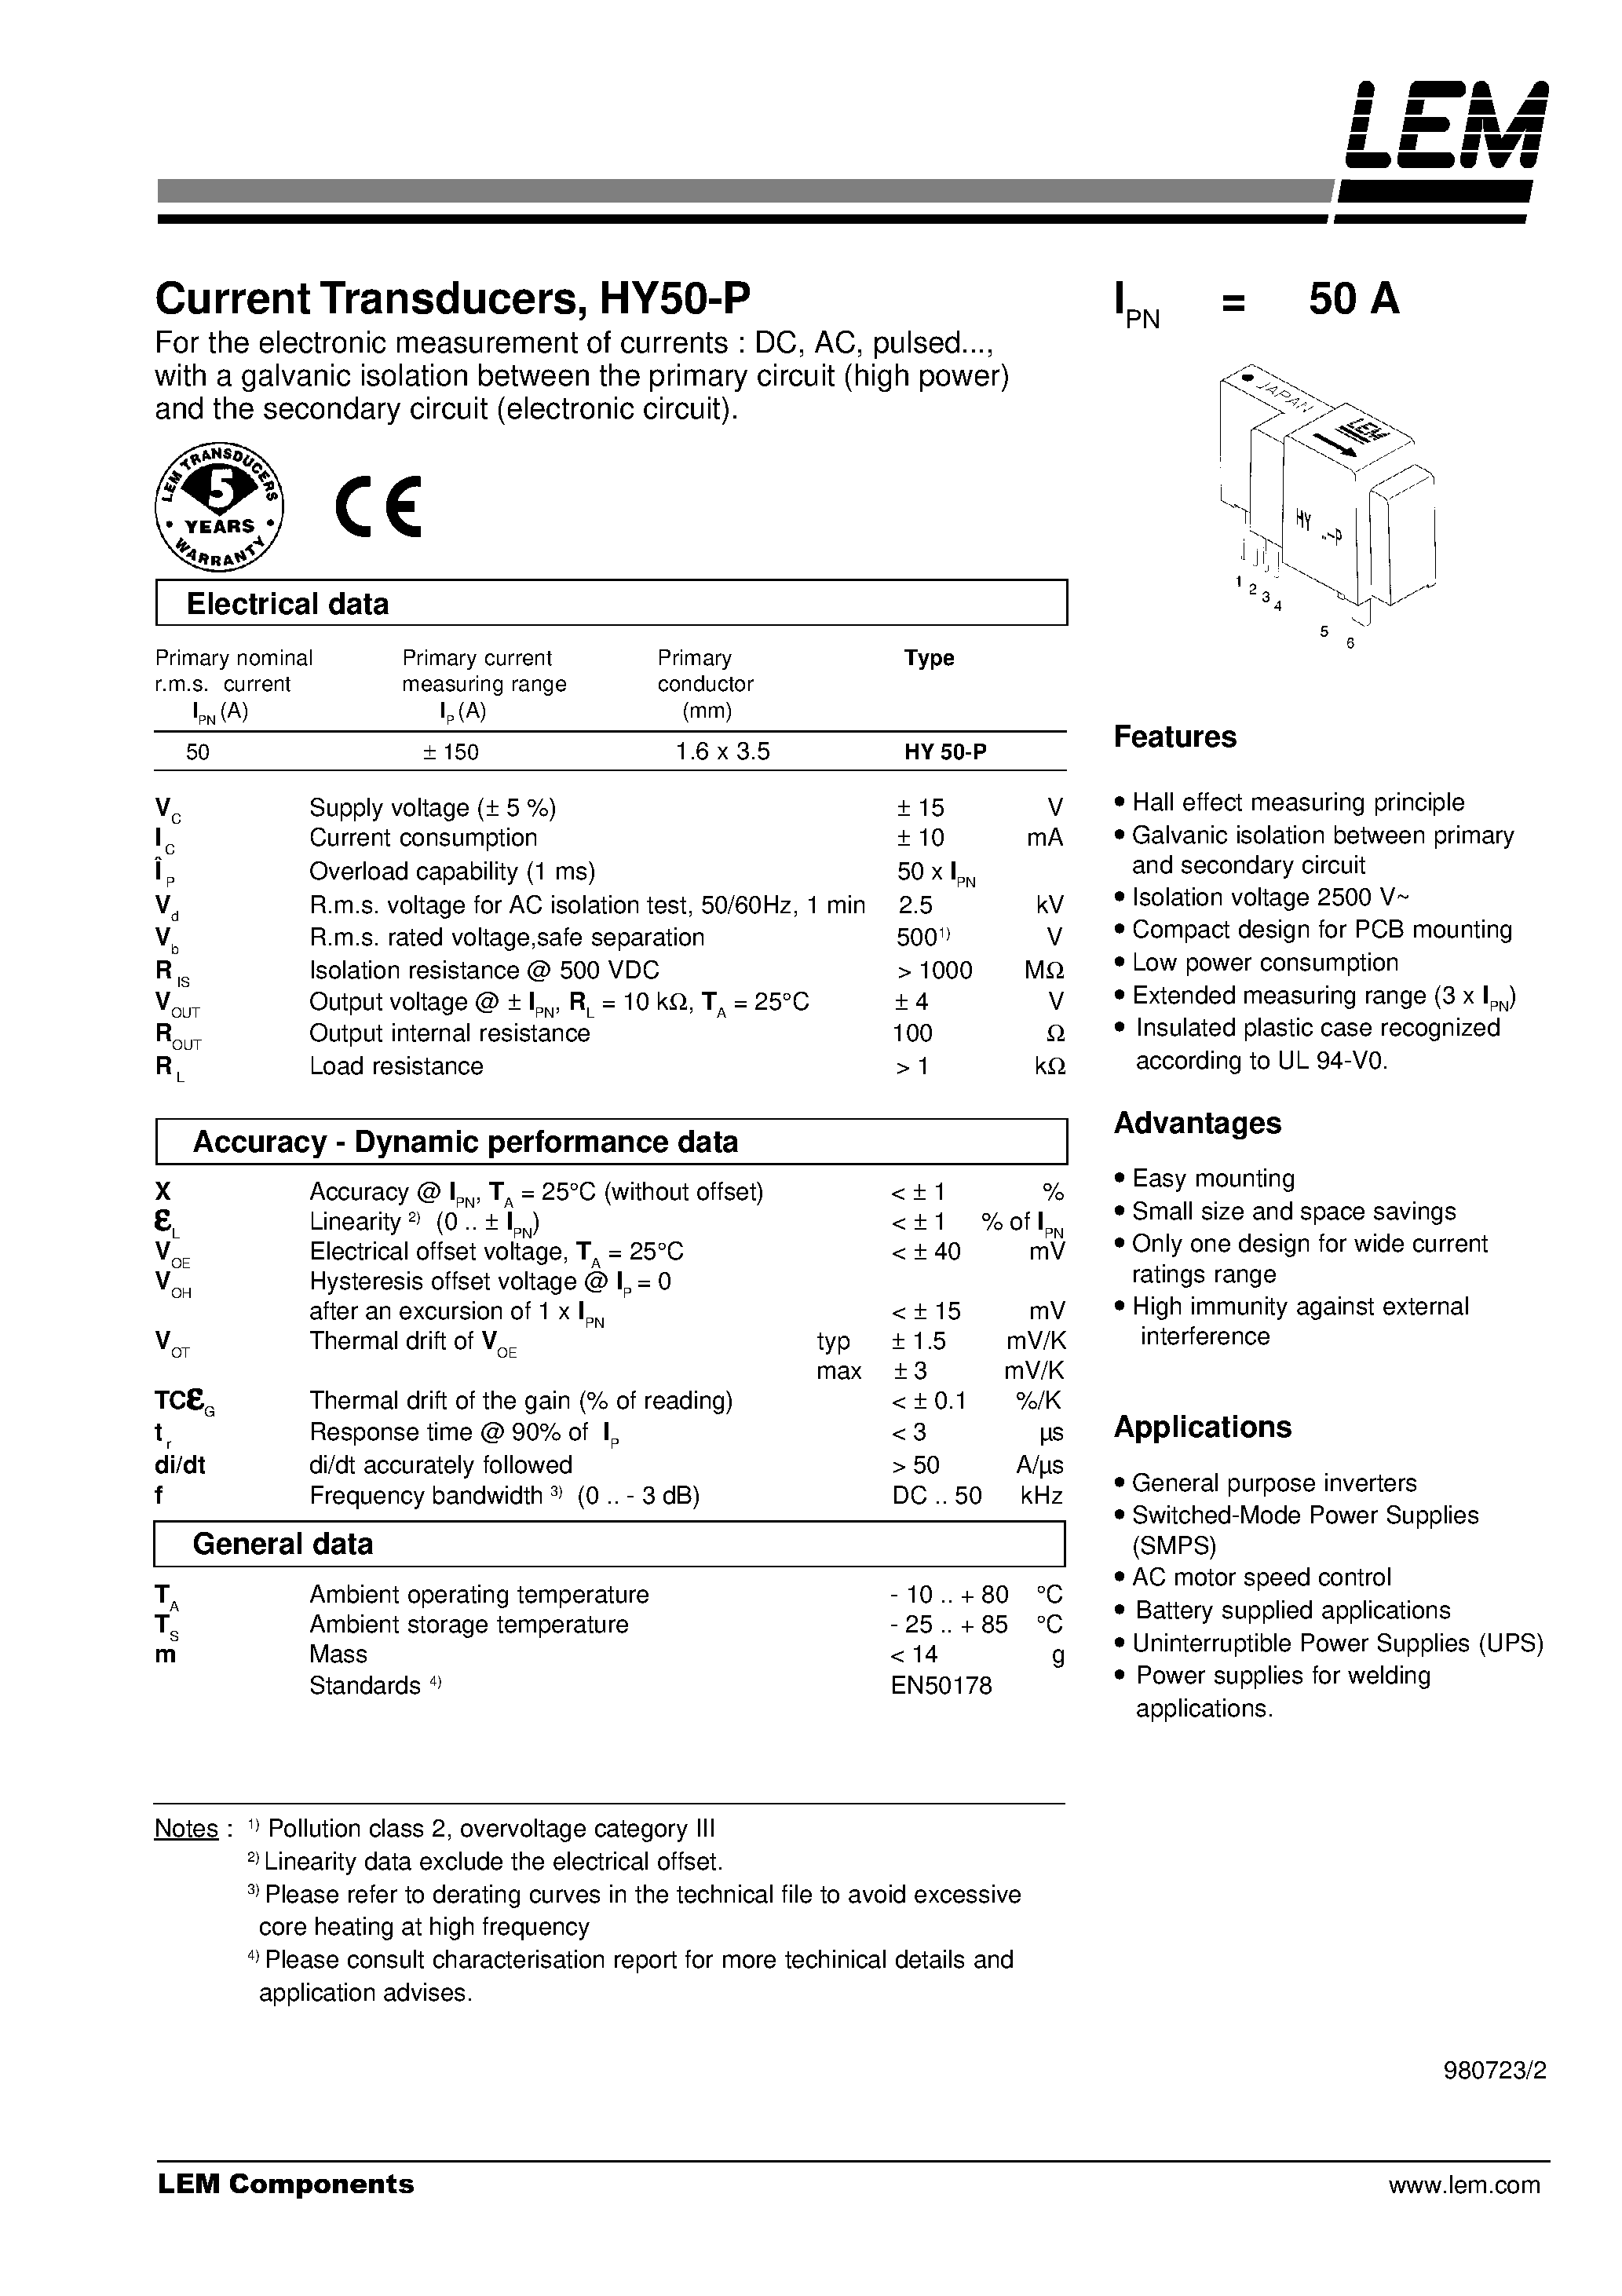 Datasheet HY50-P - Current Transducer HY 50-P page 1